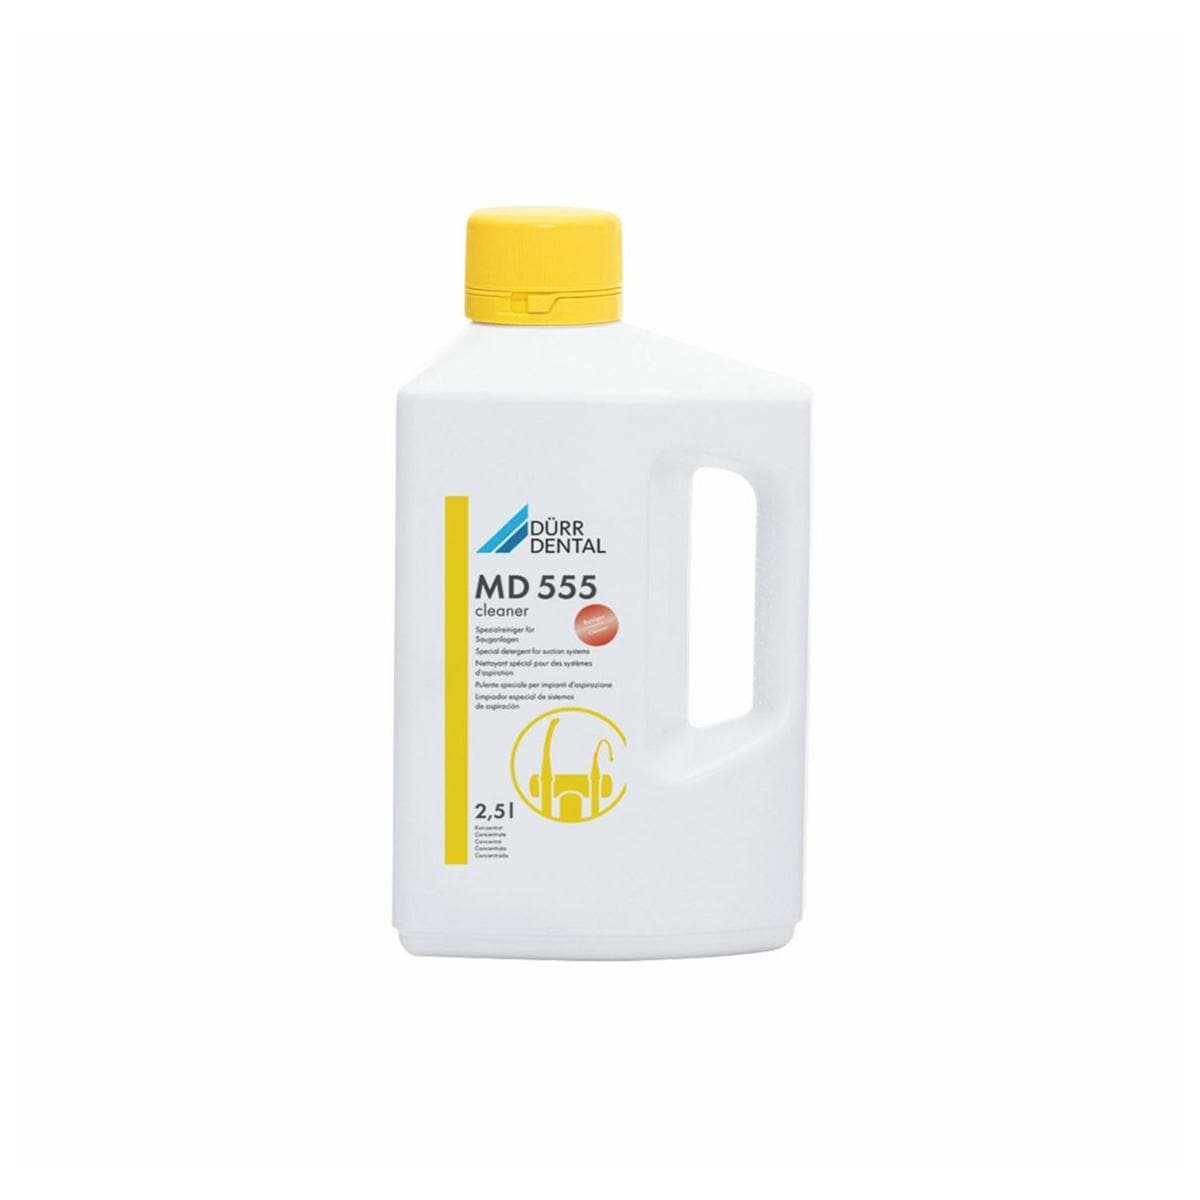 MD 555 Suction Cleaner 2.5L